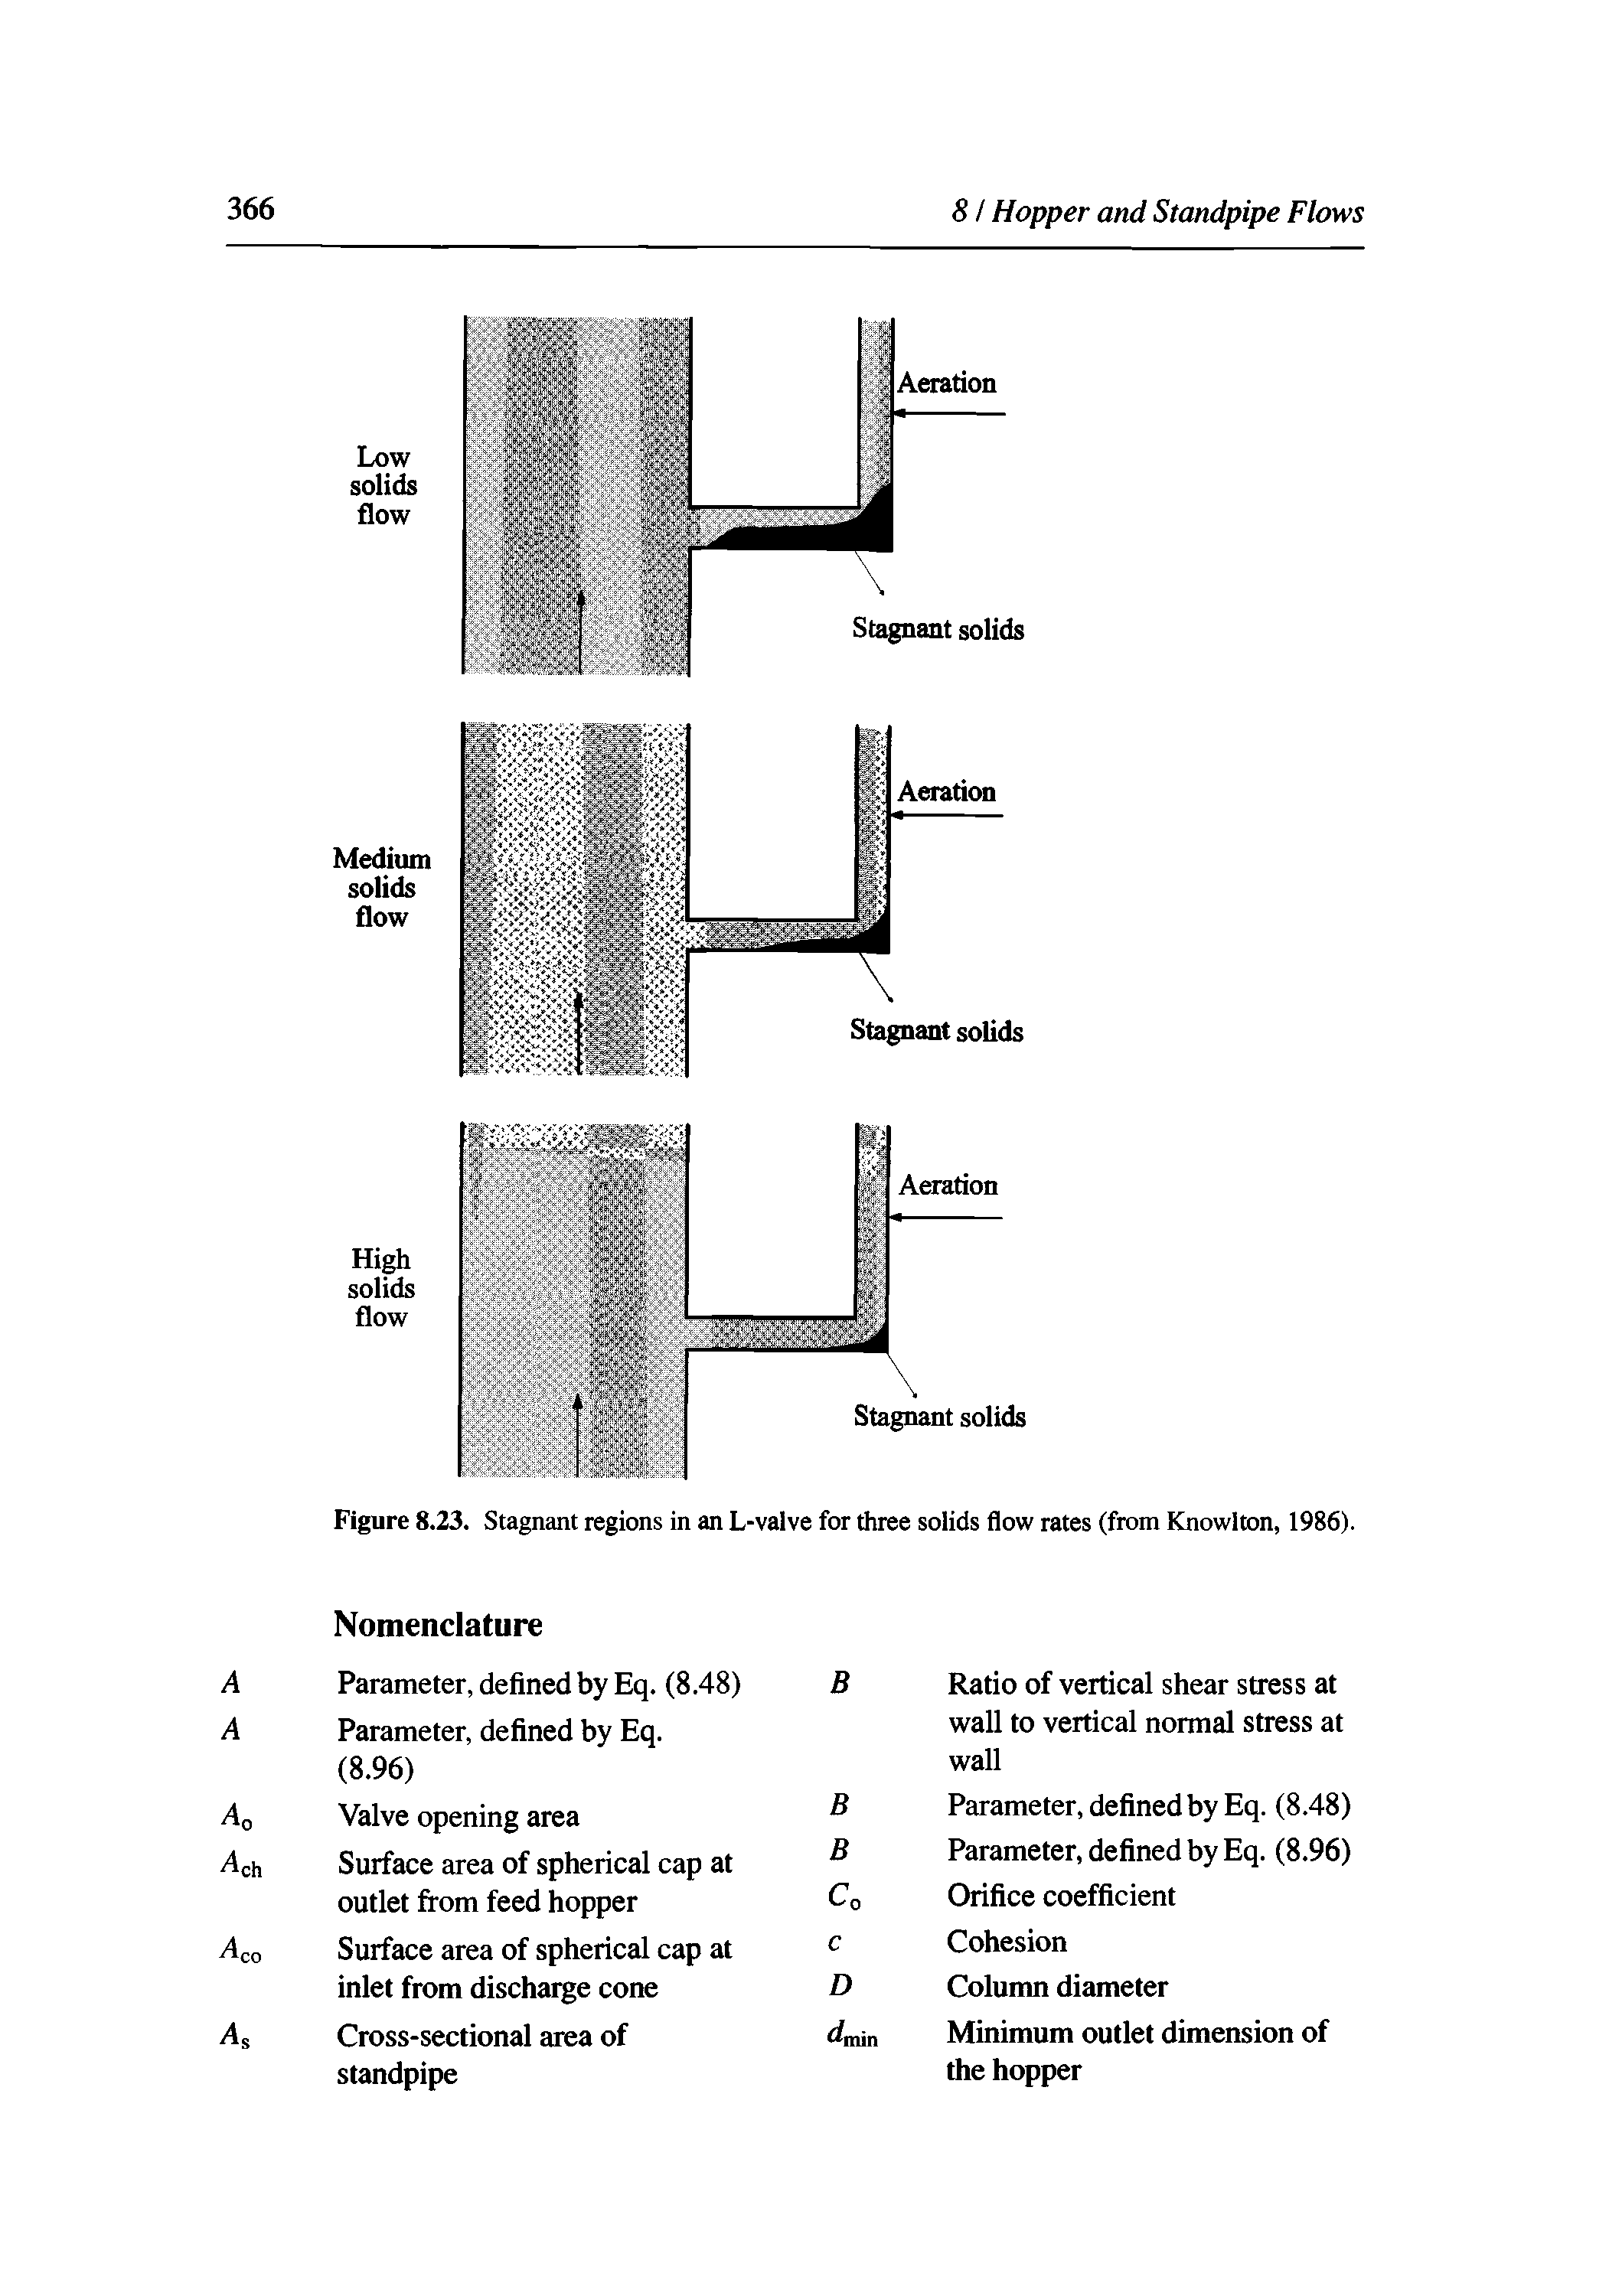 Figure 8.23. Stagnant regions in an L-valve for three solids flow rates (from Knowlton, 1986).